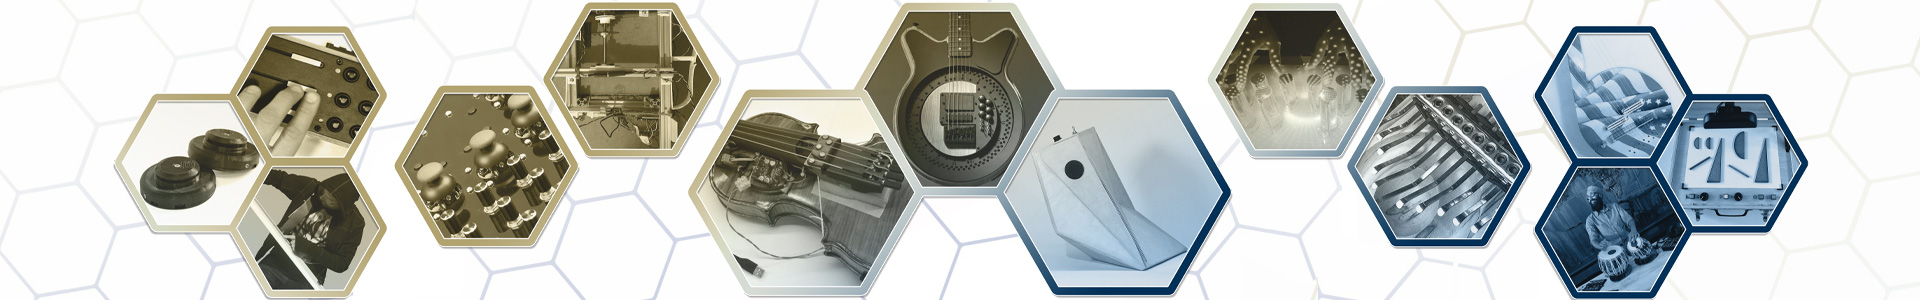 Guthman Competition instruments in hexagon crops.